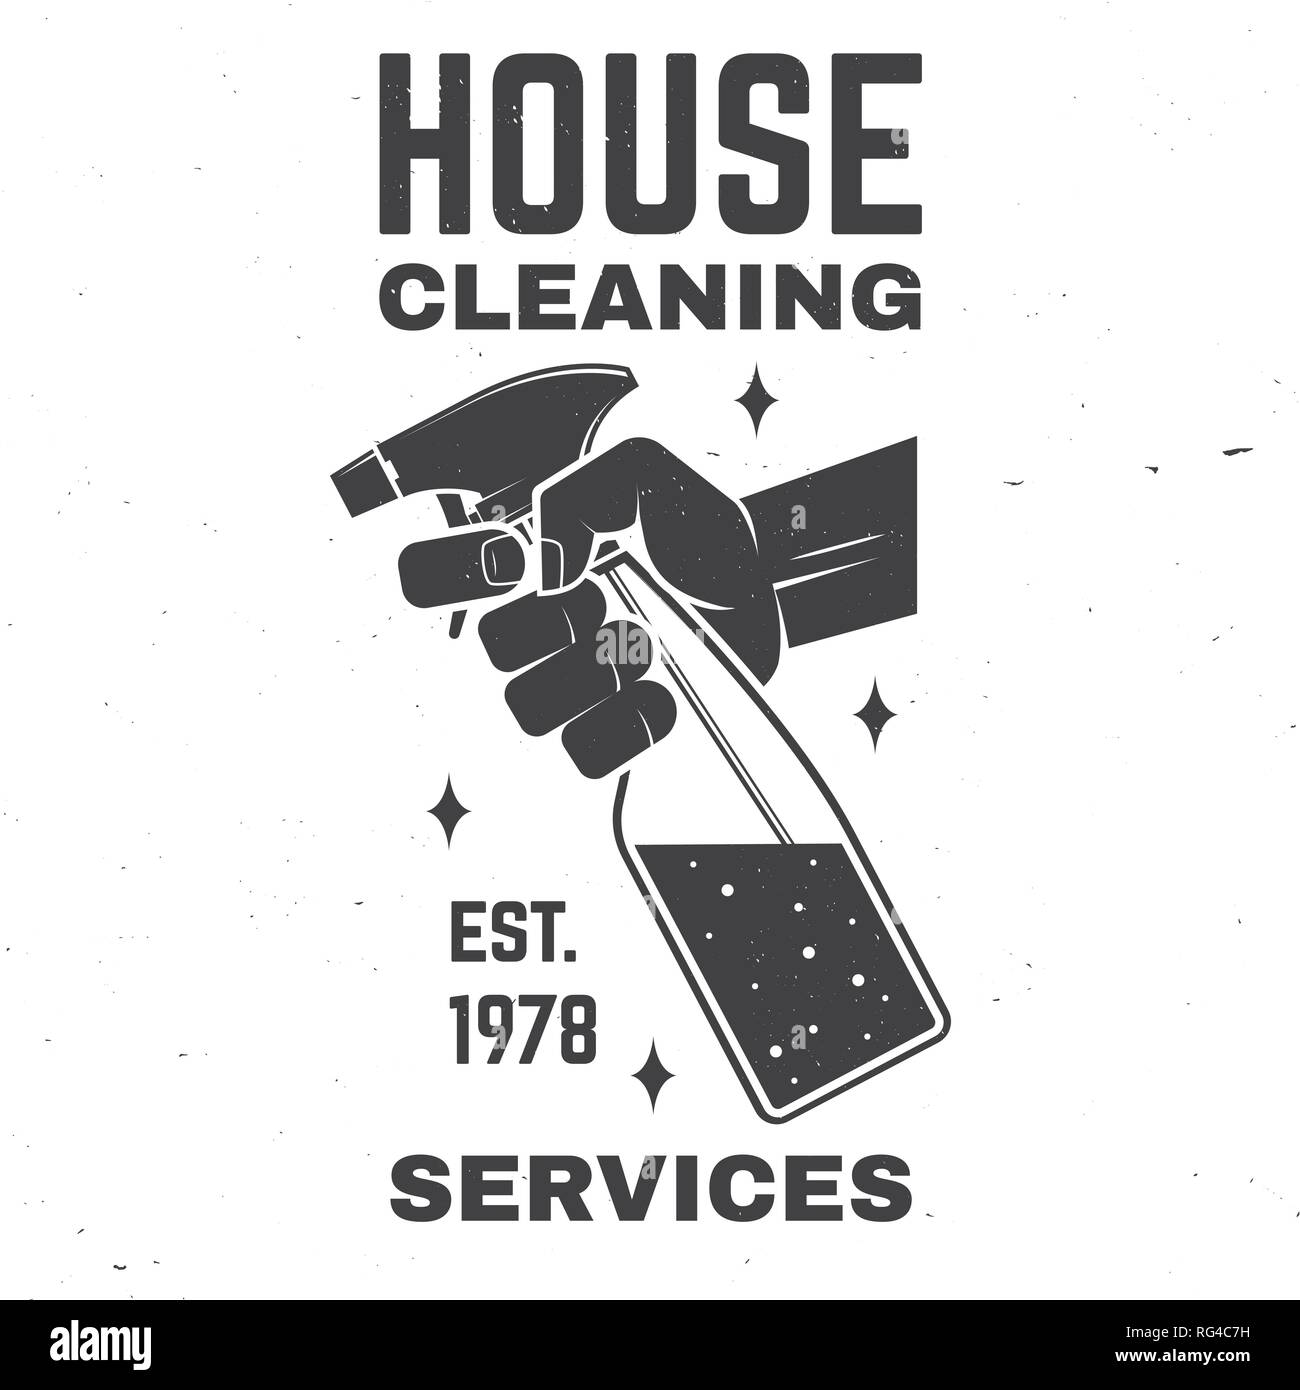 Cleaning company badge, emblem. Vector illustration. Concept for shirt, print, stamp or tee. Vintage typography design with cleaning equipments. Cleaning service sign for company related business Stock Vector